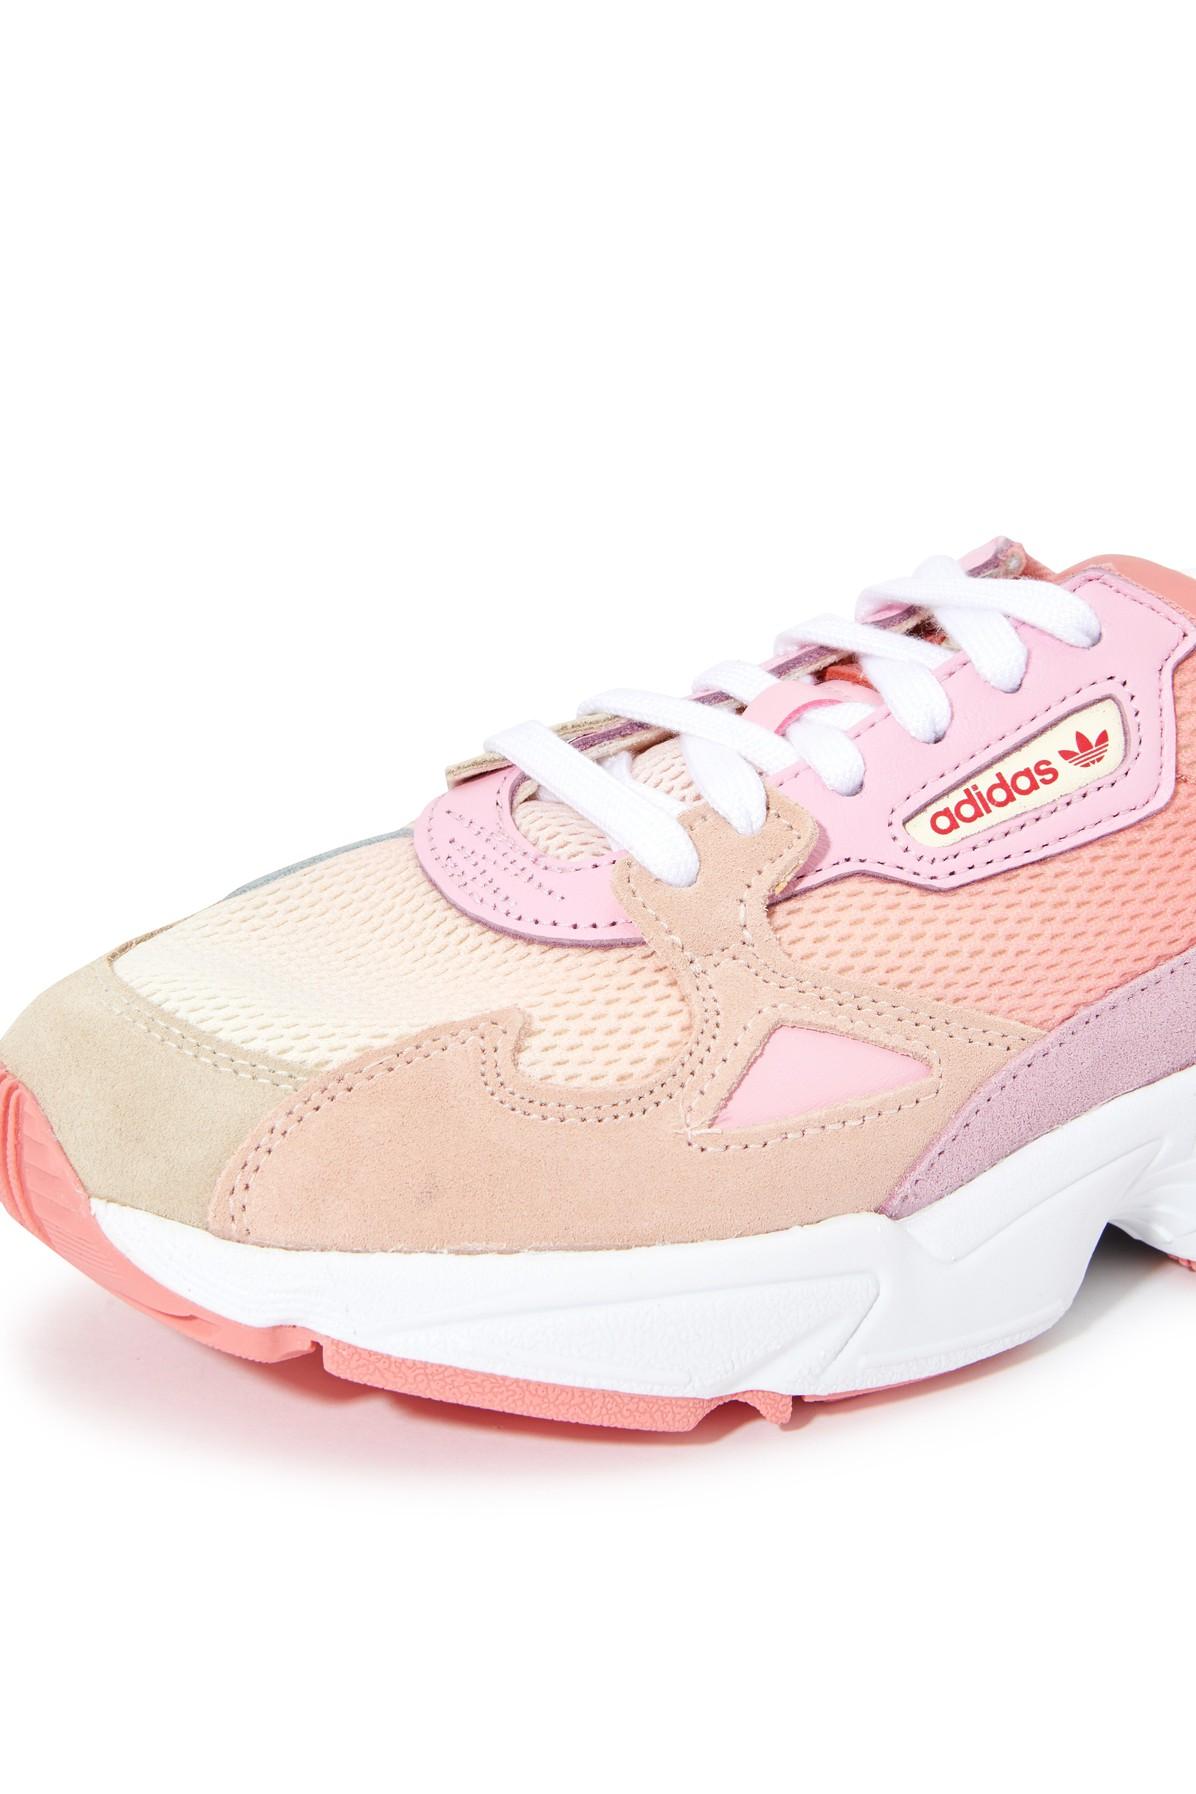 adidas Originals Leather Falcon in Peach/Peach (Pink) - Save 56% | Lyst